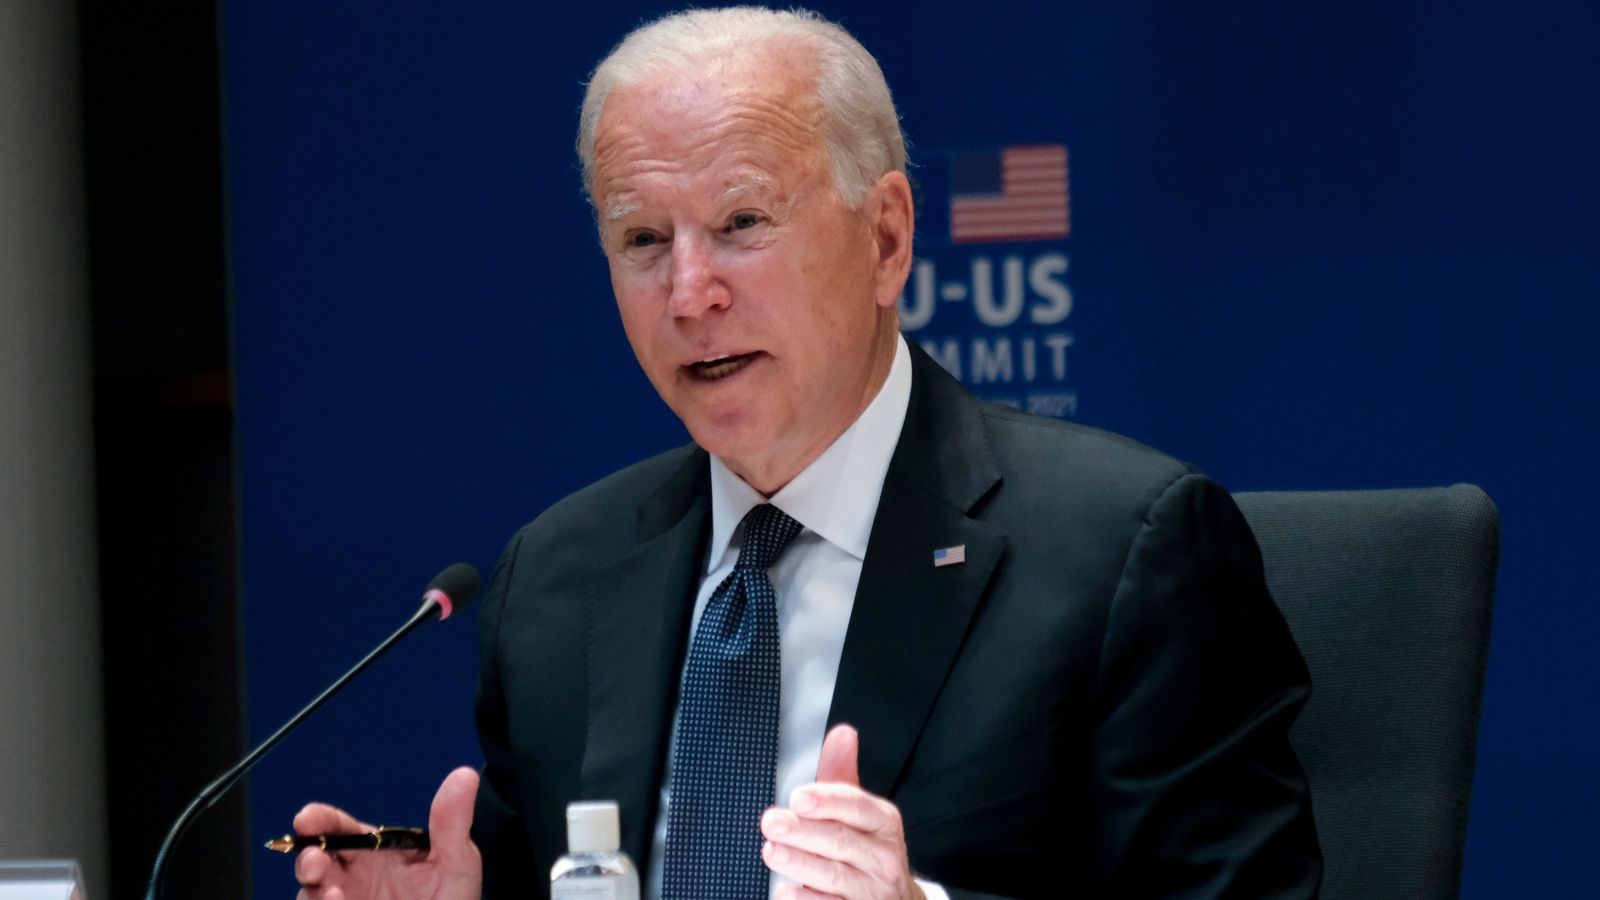 “The Entire Biden Administration Needs To Be Tried for War Crimes”: Recent Polls Show 70% Disapproval Rate From Young Voters Over Biden’s War Stance